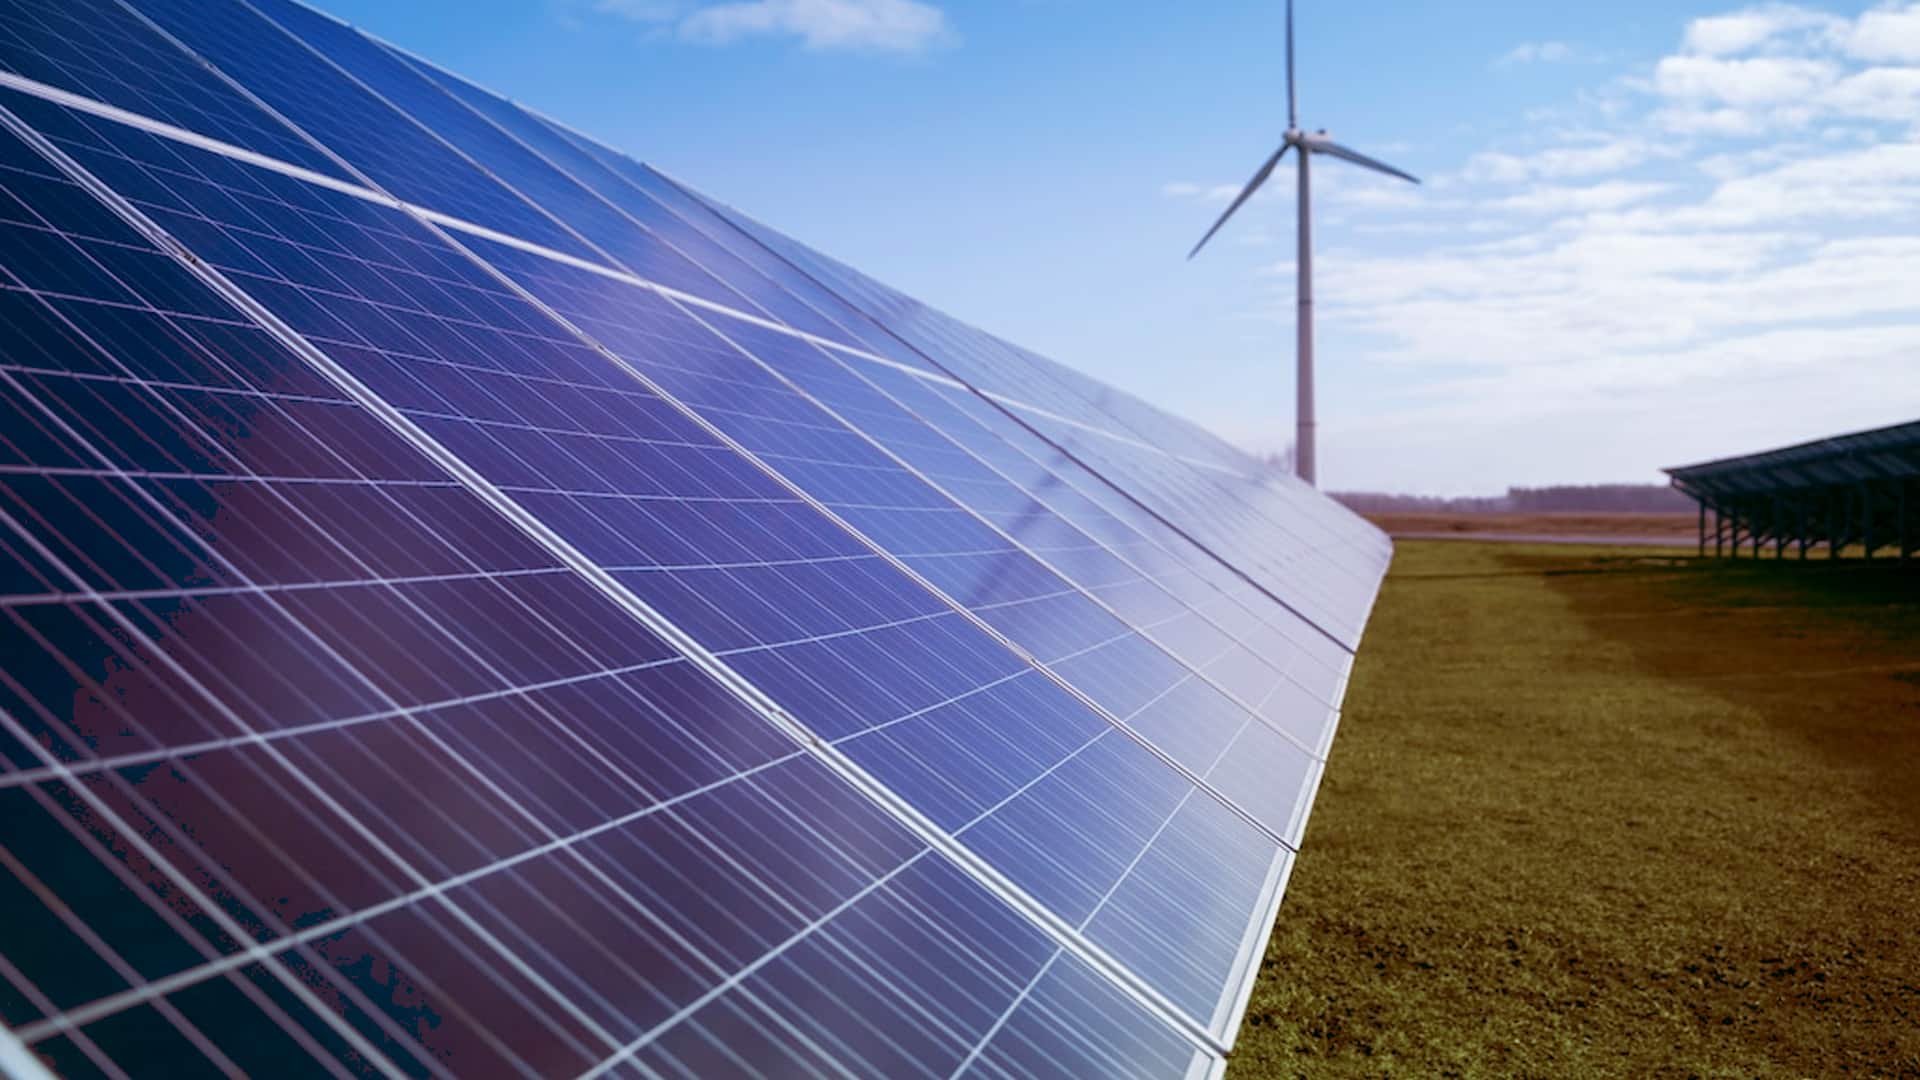 Azure Power Signs Agreement for 600 MW of First Solar's High-Performance Modules